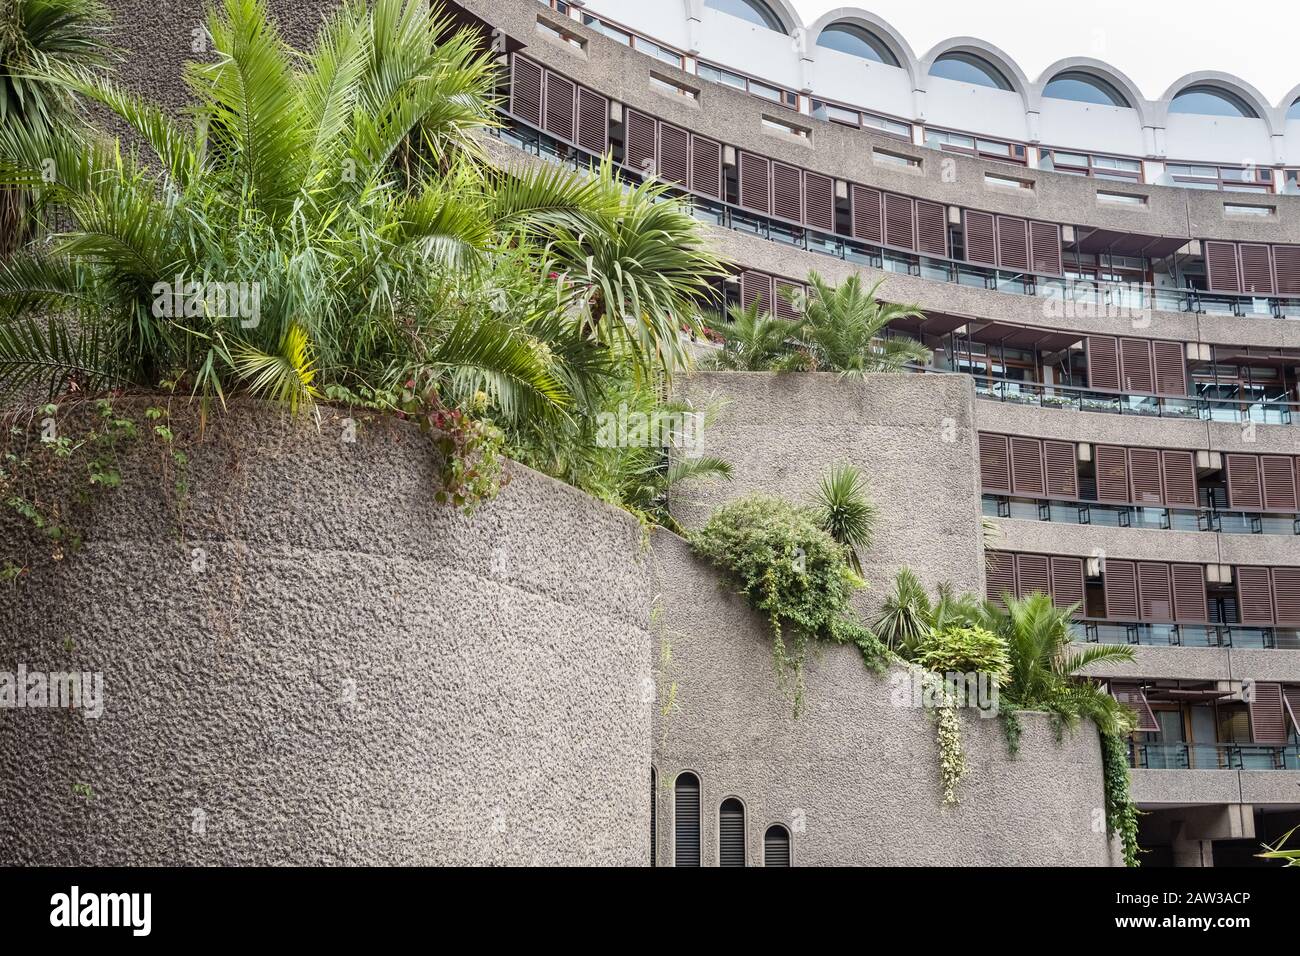 Green garden plants used to soften the appearance of brutalist architecture, The Curve, Barbican, London, UK Stock Photo